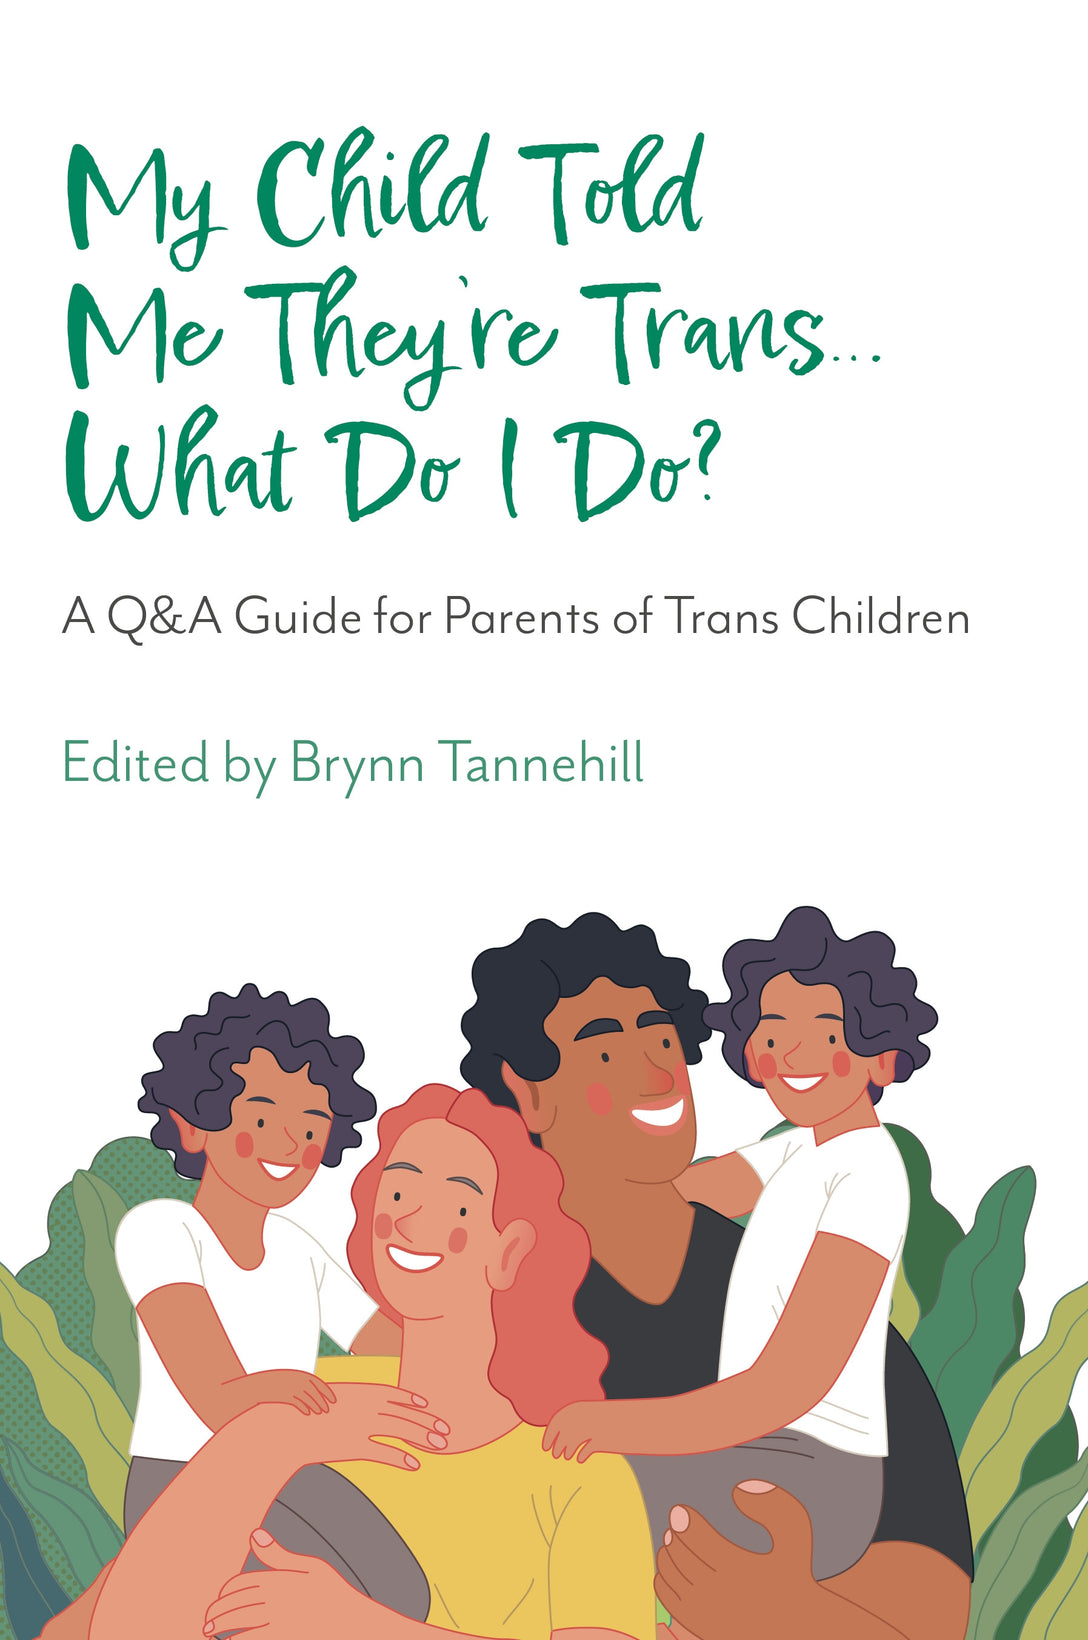 My Child Told Me They're Trans...What Do I Do? by Brynn Tannehill, No Author Listed